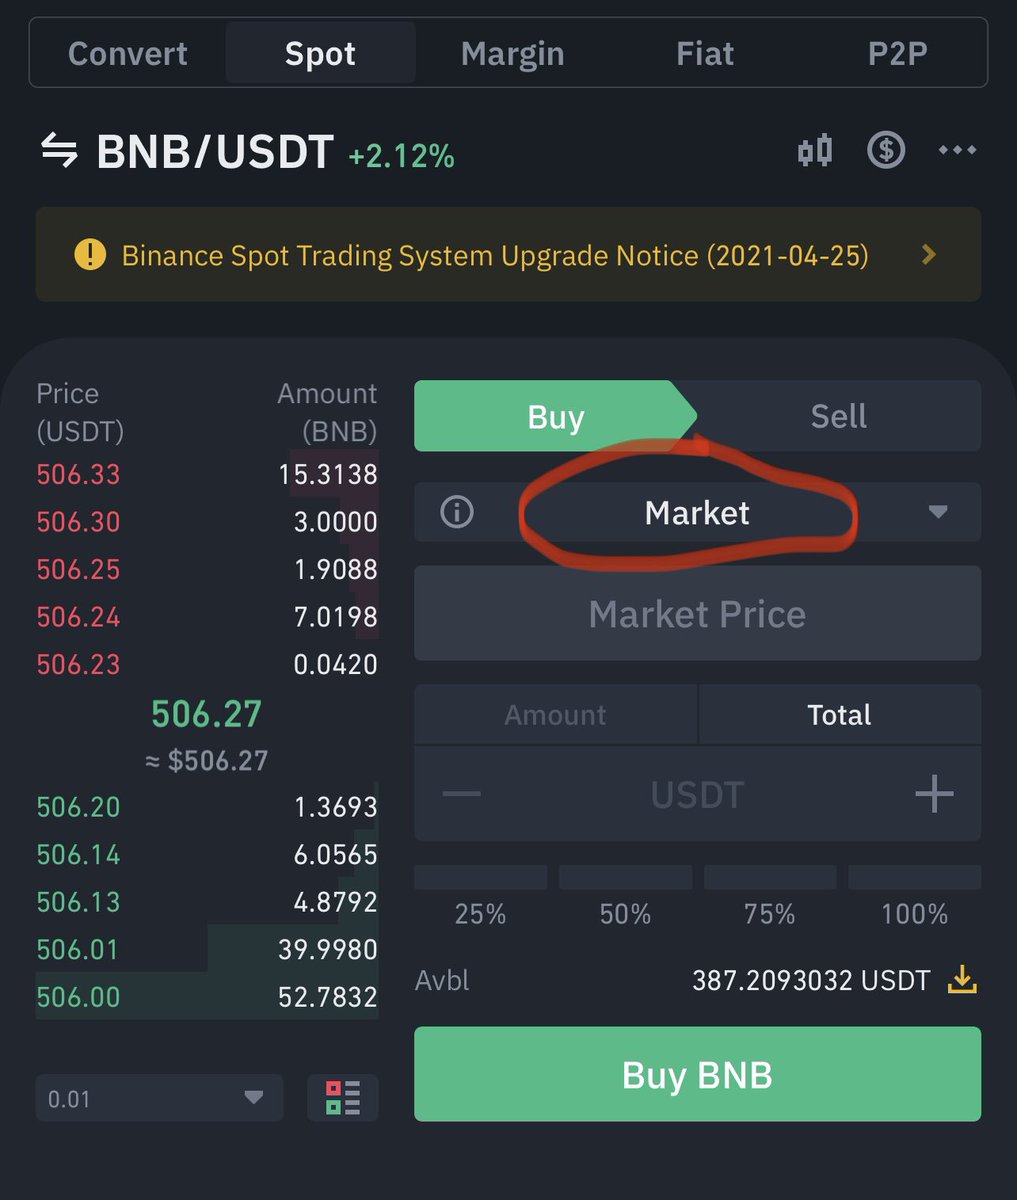 -Click Buy (It’s on ‘Buy’ by default)-Make sure it shows ‘Market’ and input the amount of BNB you want to buy in USDT-Click Buy BNB and your order will be executed. Go back to Wallet to see your BNB balance